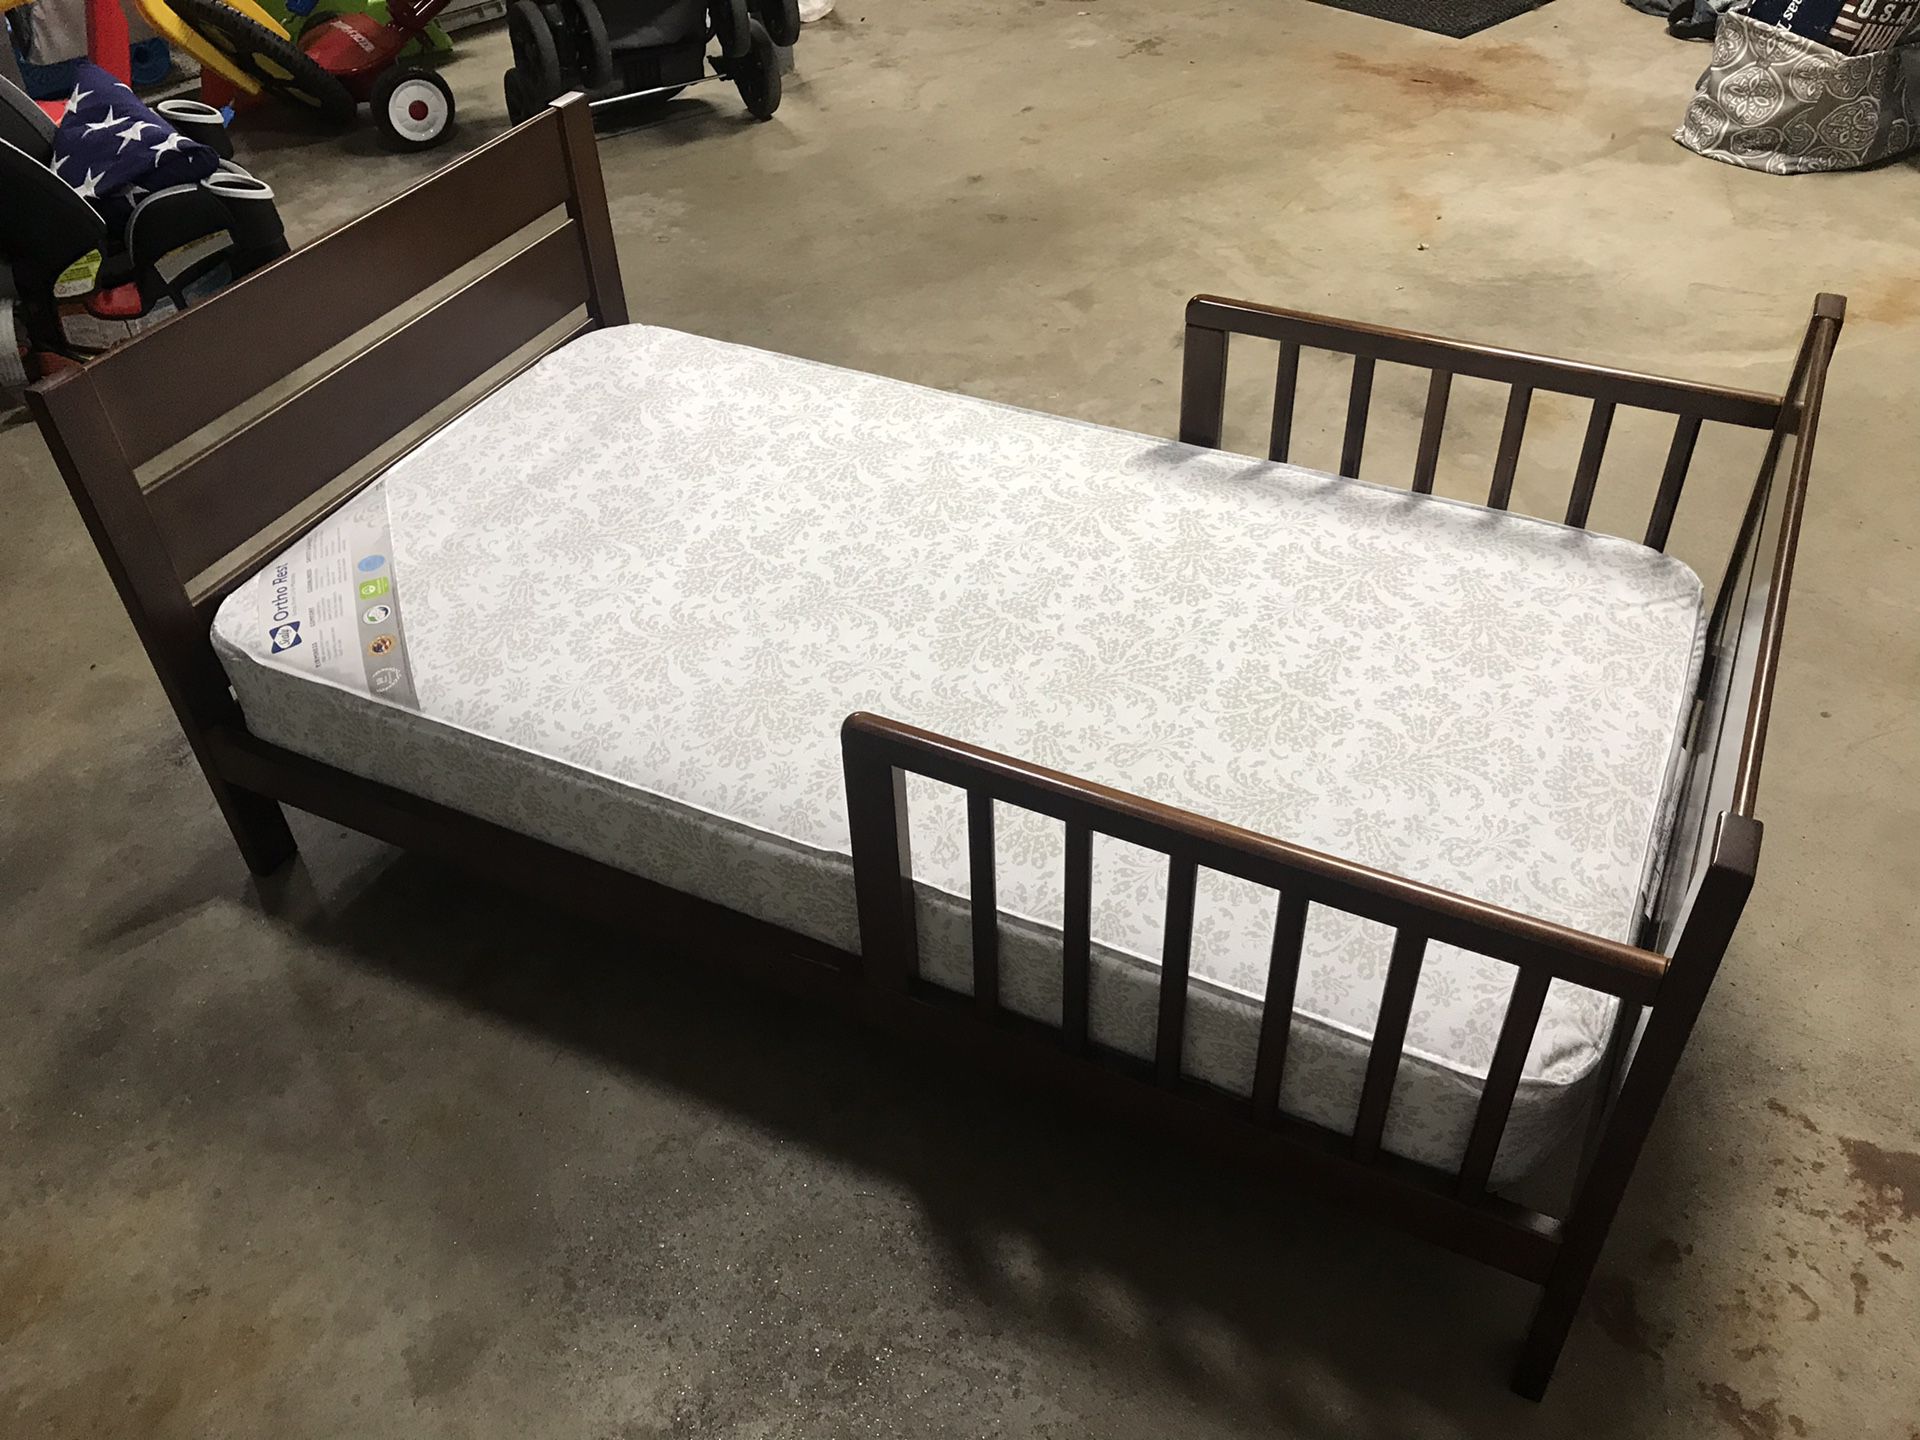 Like new brown toddler bed with new sealy ortho rest mattress. 35” x 29”